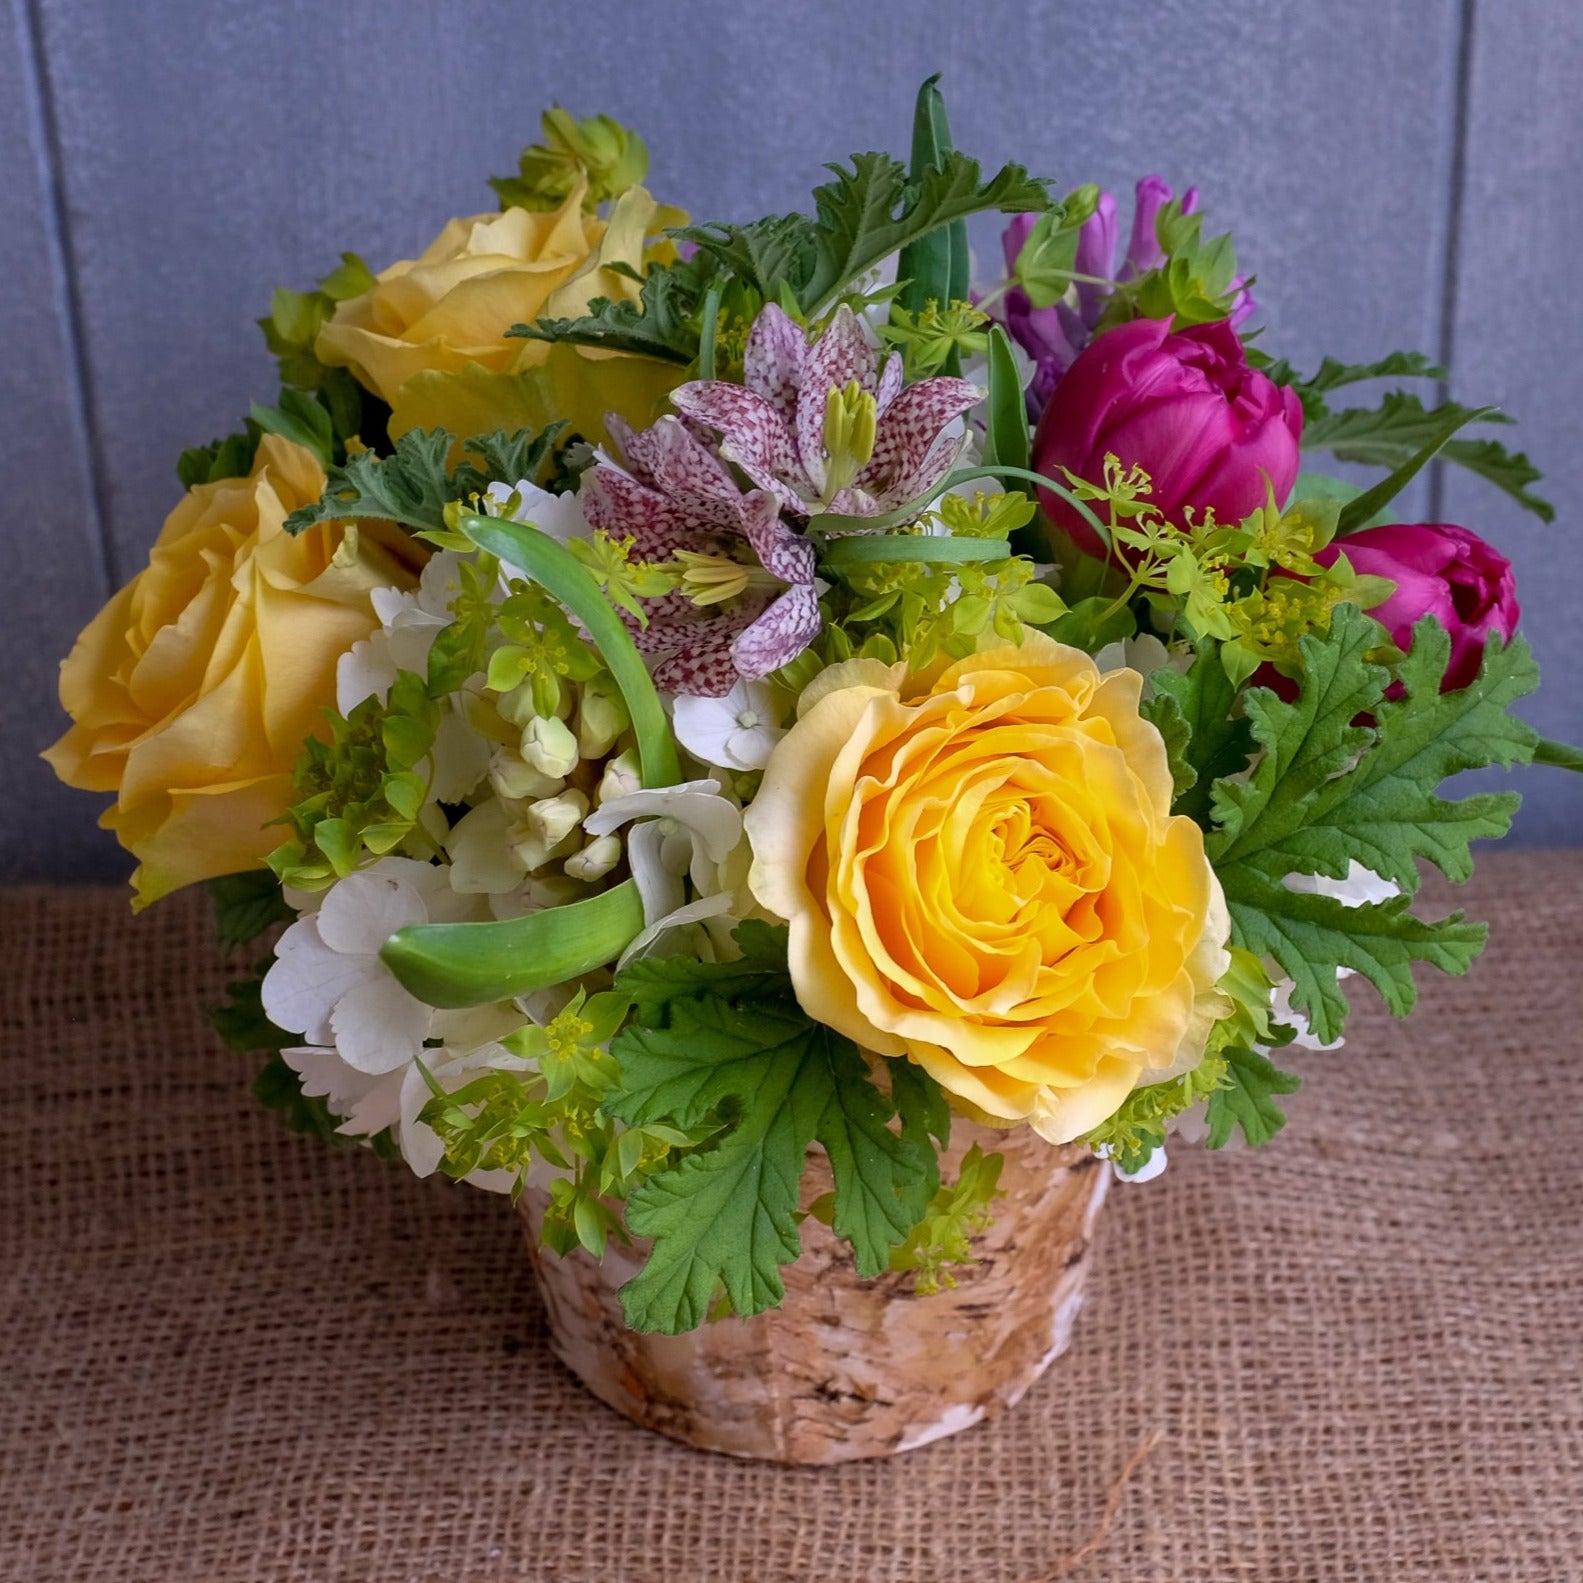 Shenandoah Flower Bouquet with Checkered Fritillaria, Double Tulips, and Scented Geranium Foliage by Michler's Florist